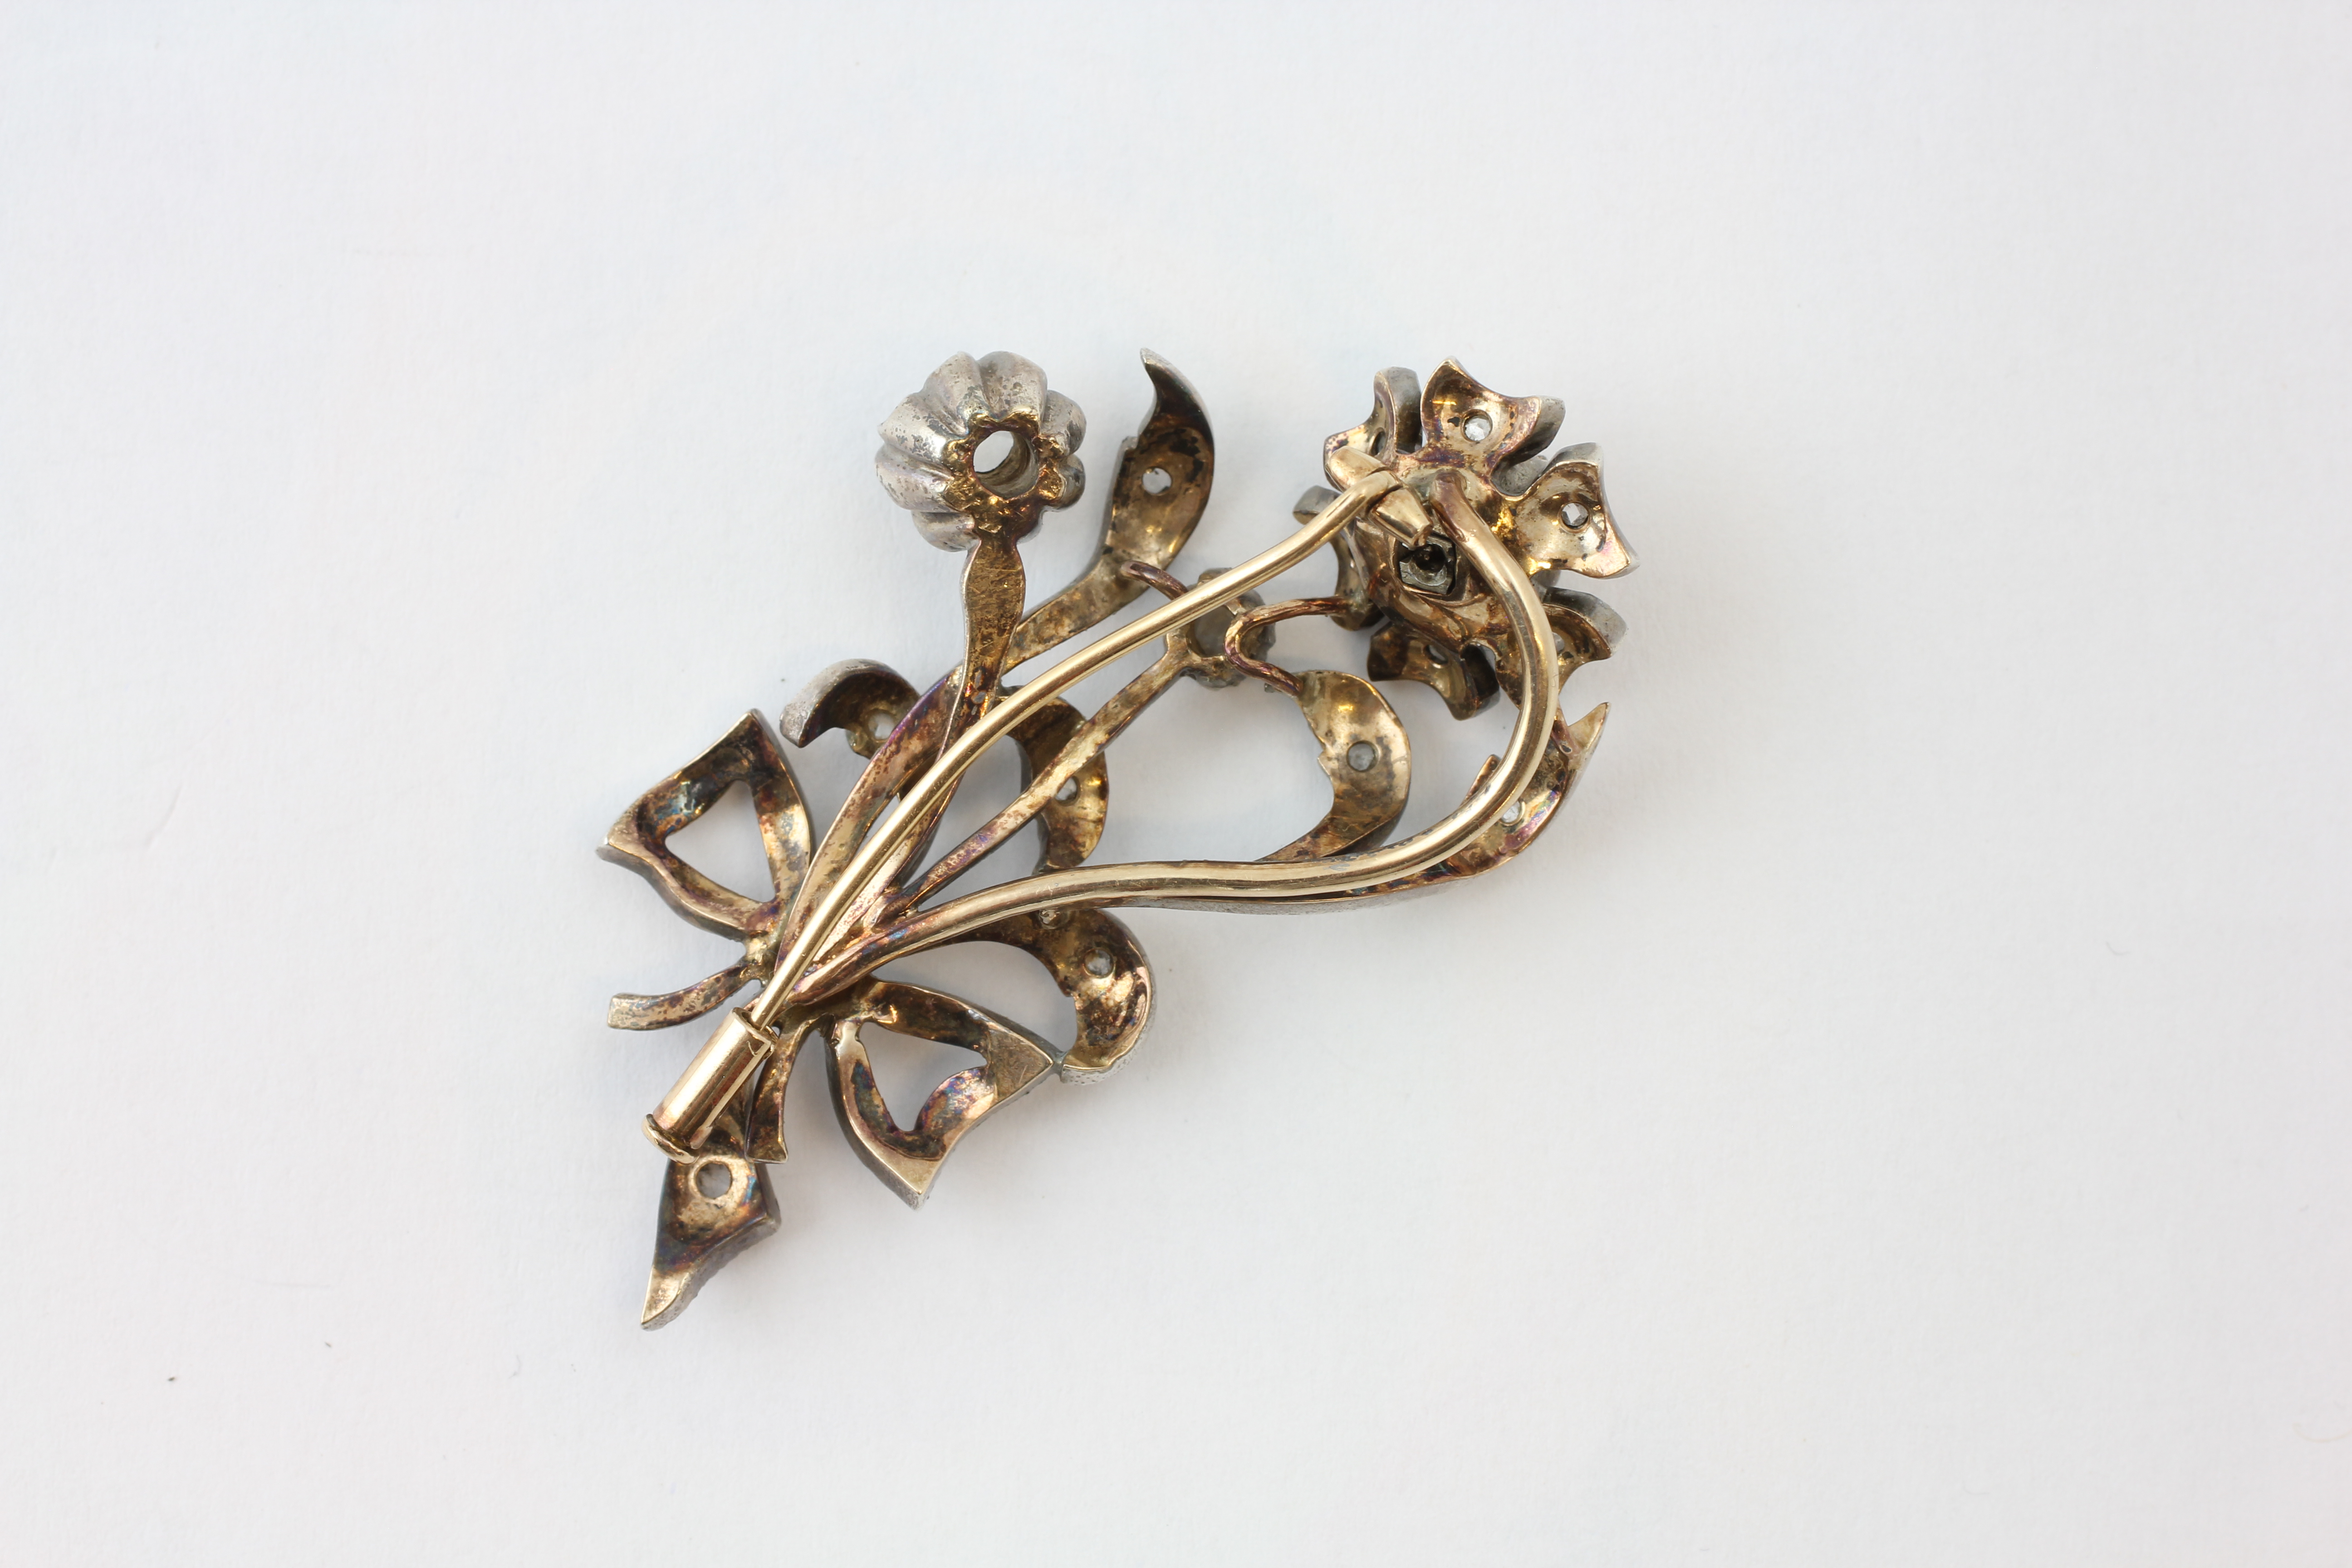 AN EDWARDIAN DIAMOND BROOCH OF FLOWERHEAD AND BOW DESIGN SET IN WHITE AND YELLOW PRECIOUS METAL, - Image 5 of 5